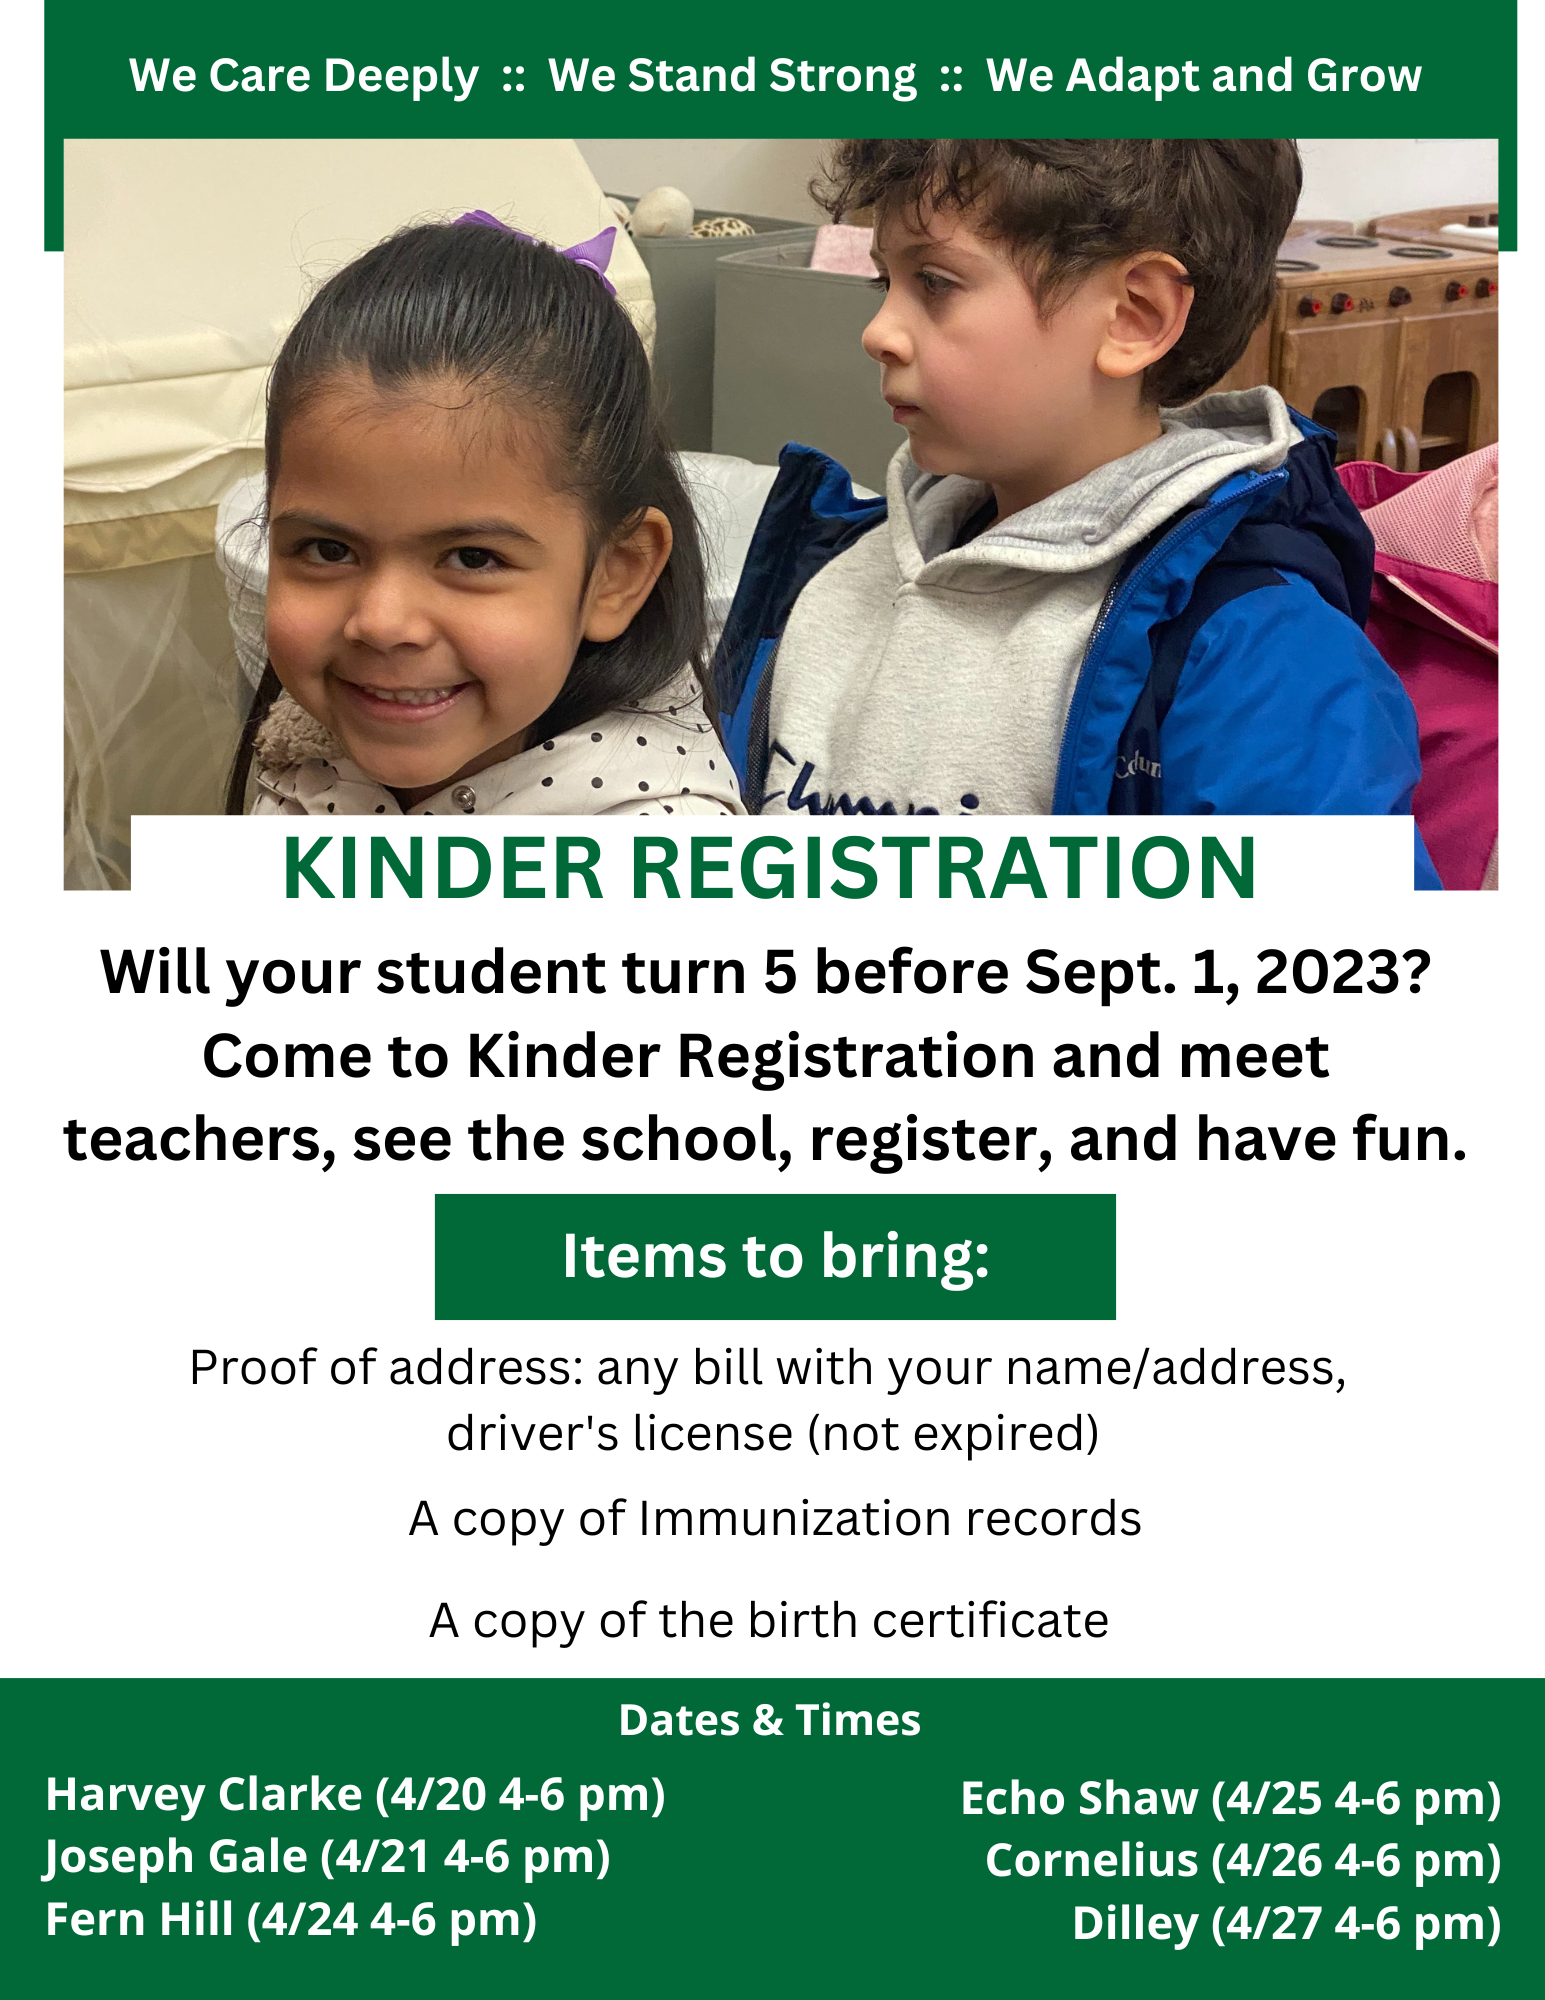 Dates, times and info for Pre-K Registration